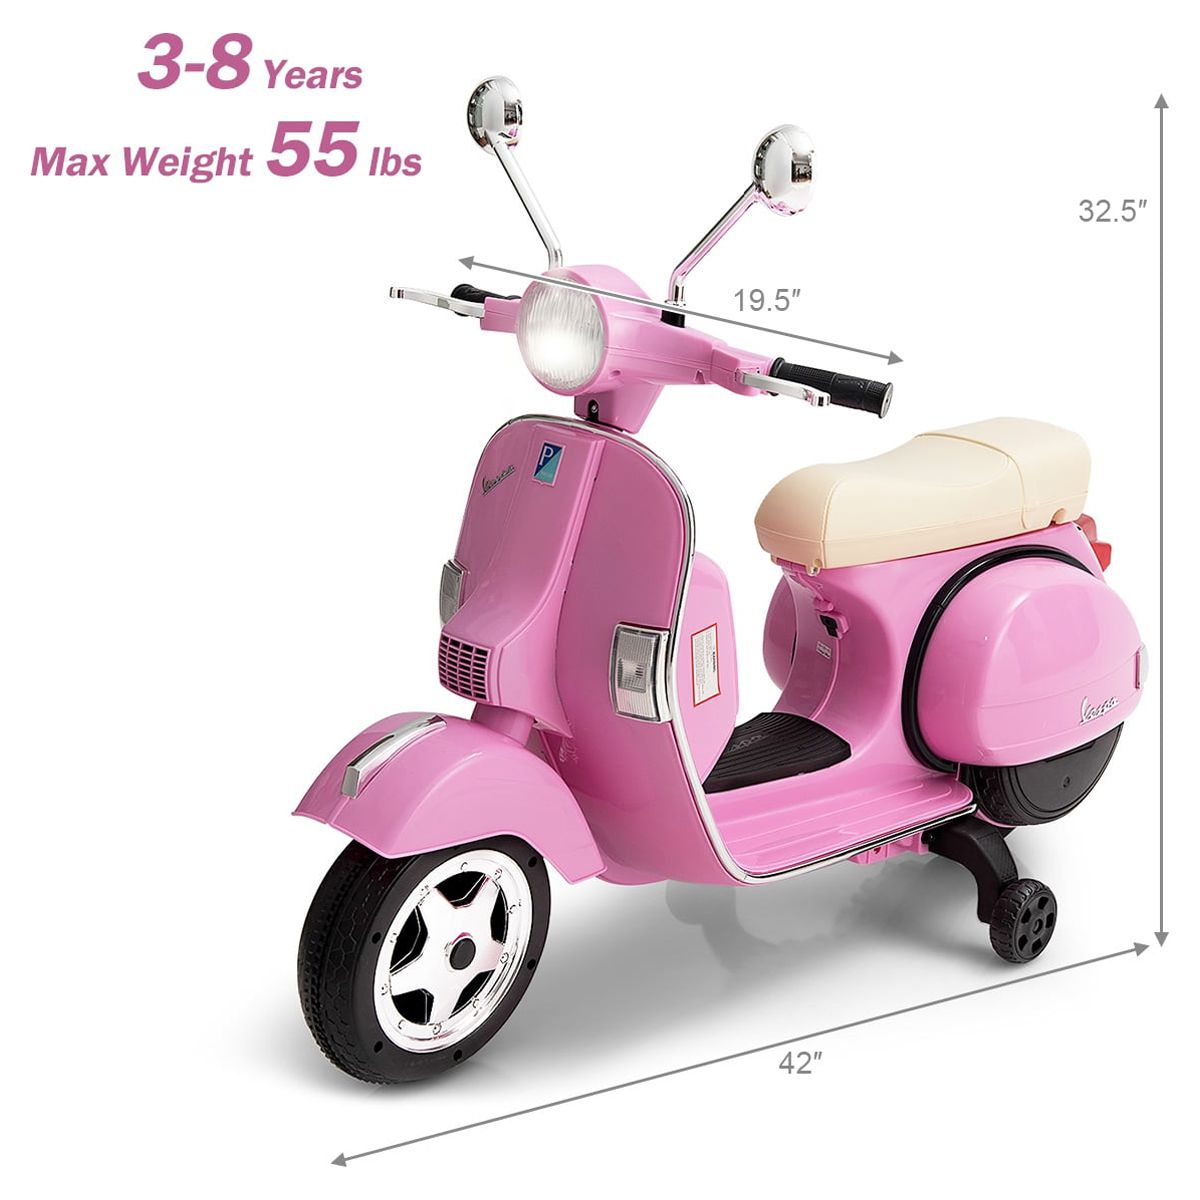 Costway Kids Vespa Scooter, 6V Rechargeable Ride on Motorcycle w/Training Wheels Pink - image 4 of 9